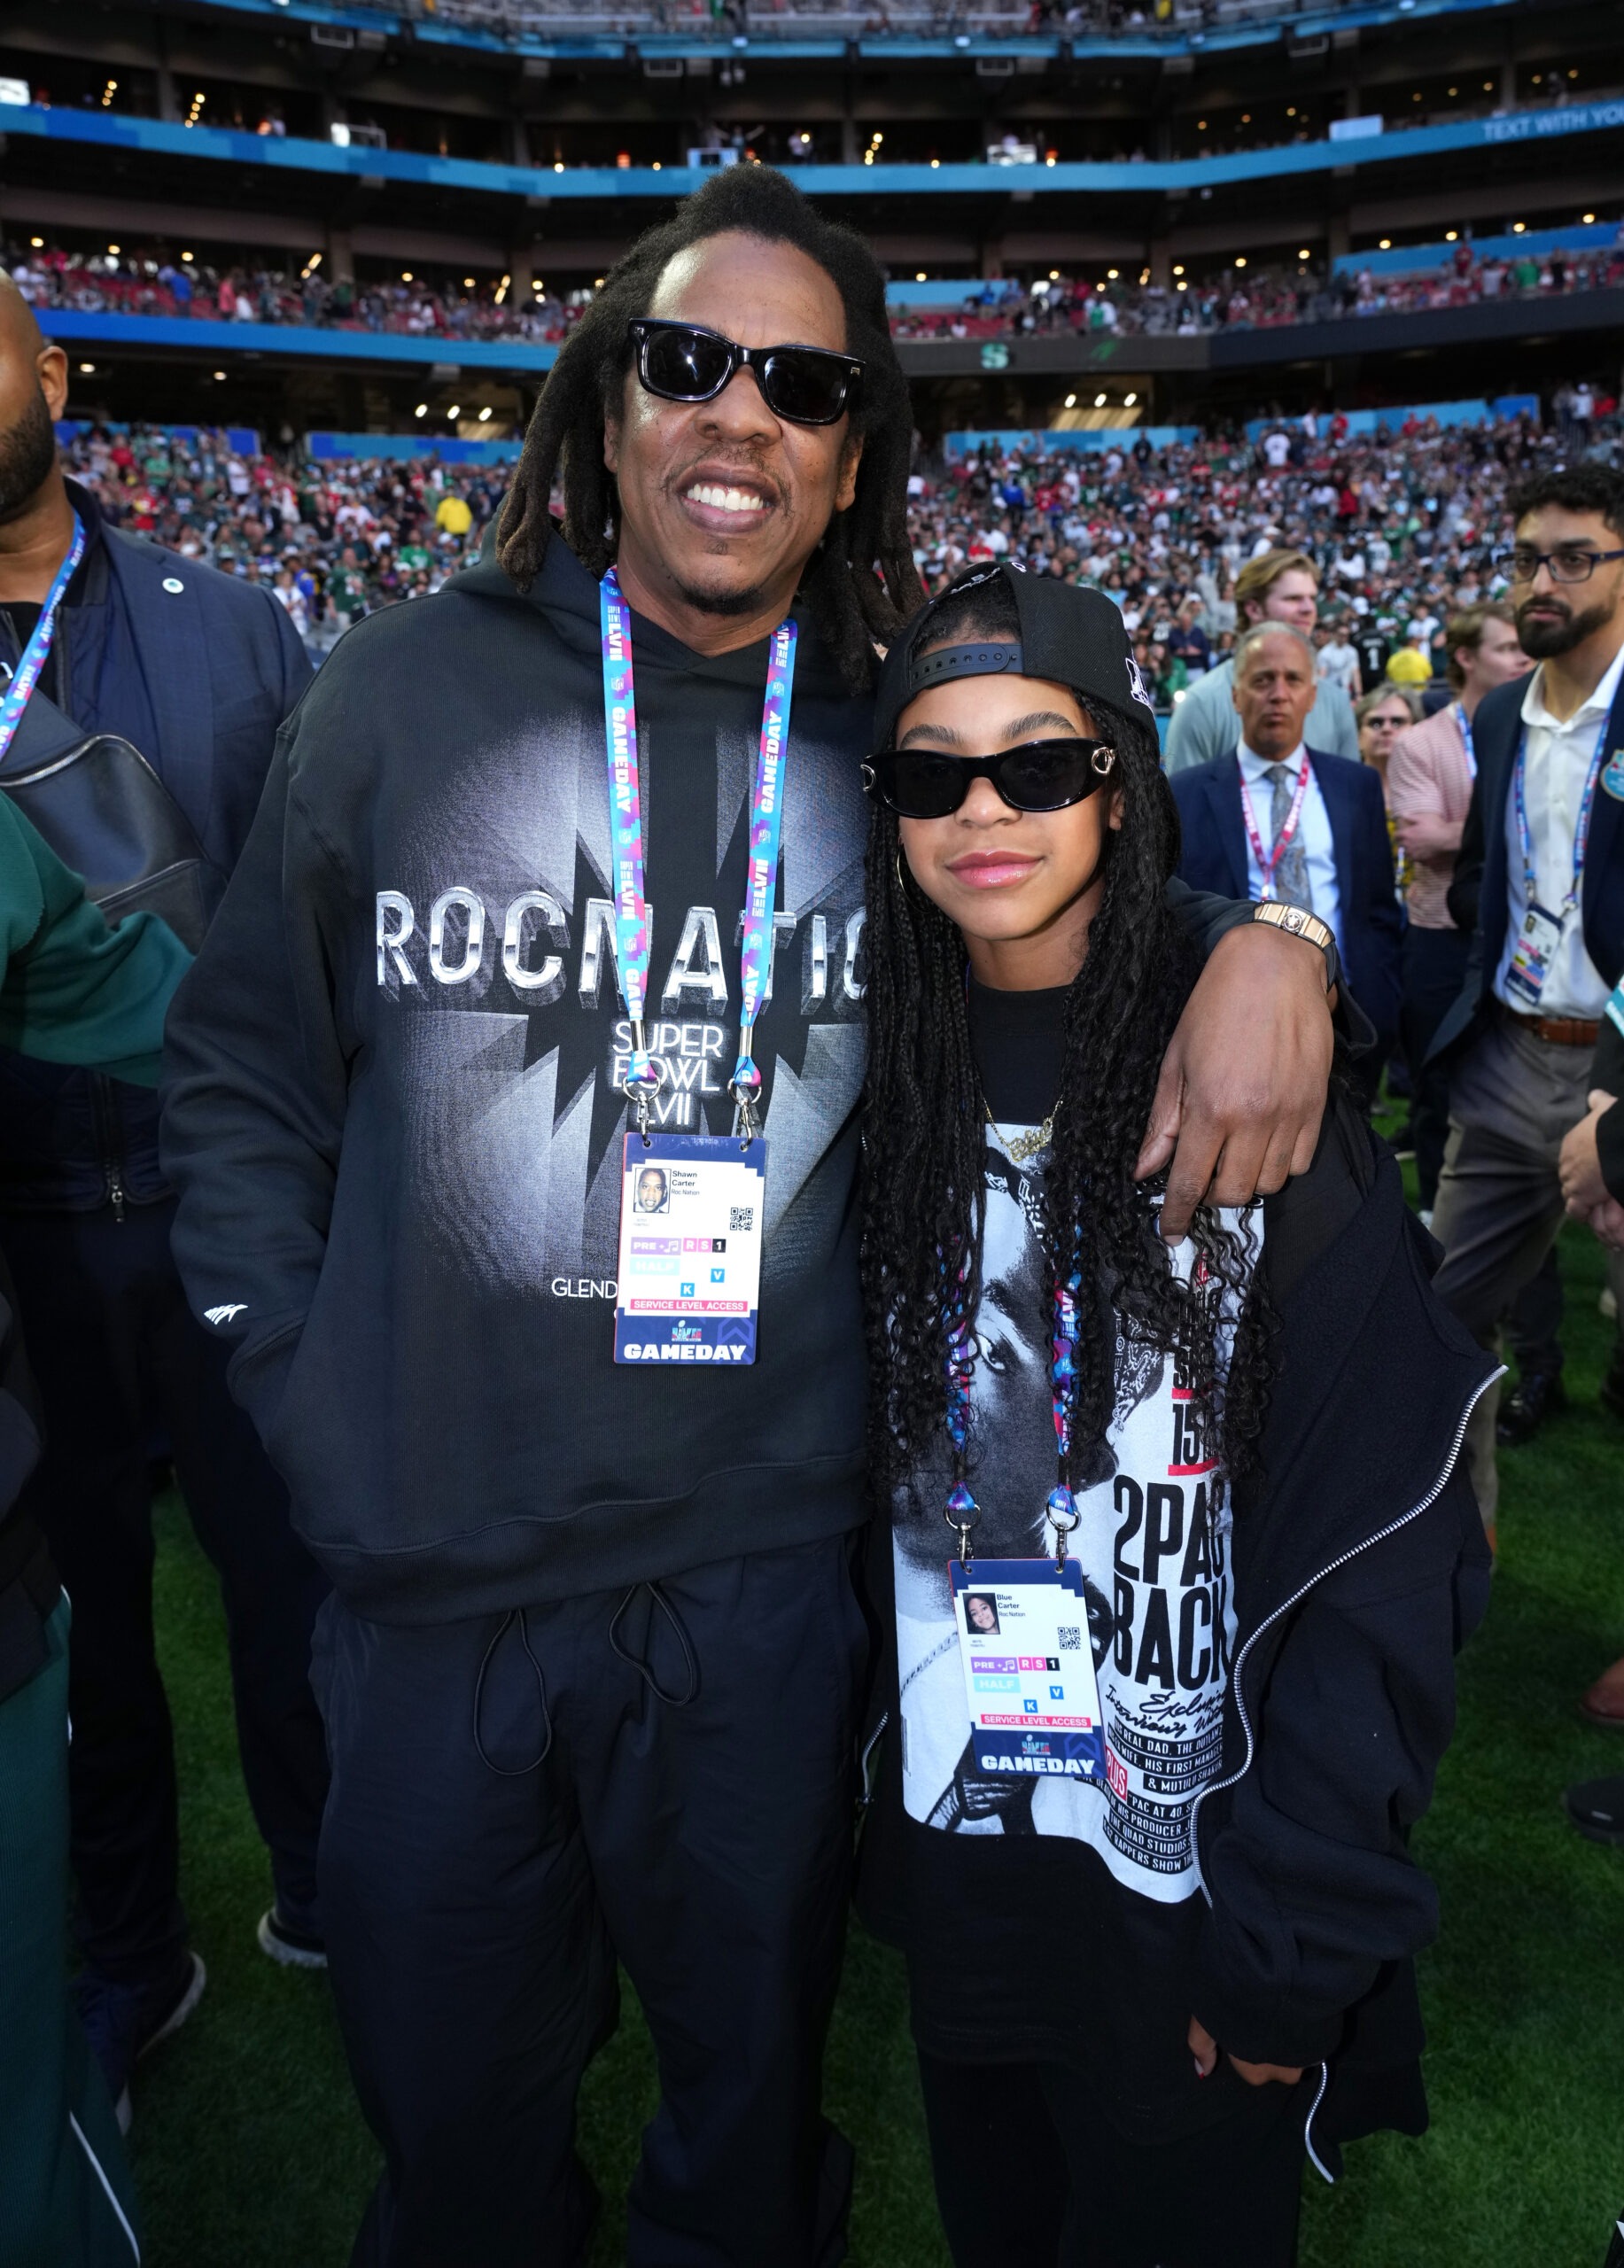 Jay-Z and Blue Ivy Carter at the Super Bowl LVII in Glendale, Arizona on February 12, 2023 | Source: Getty Images